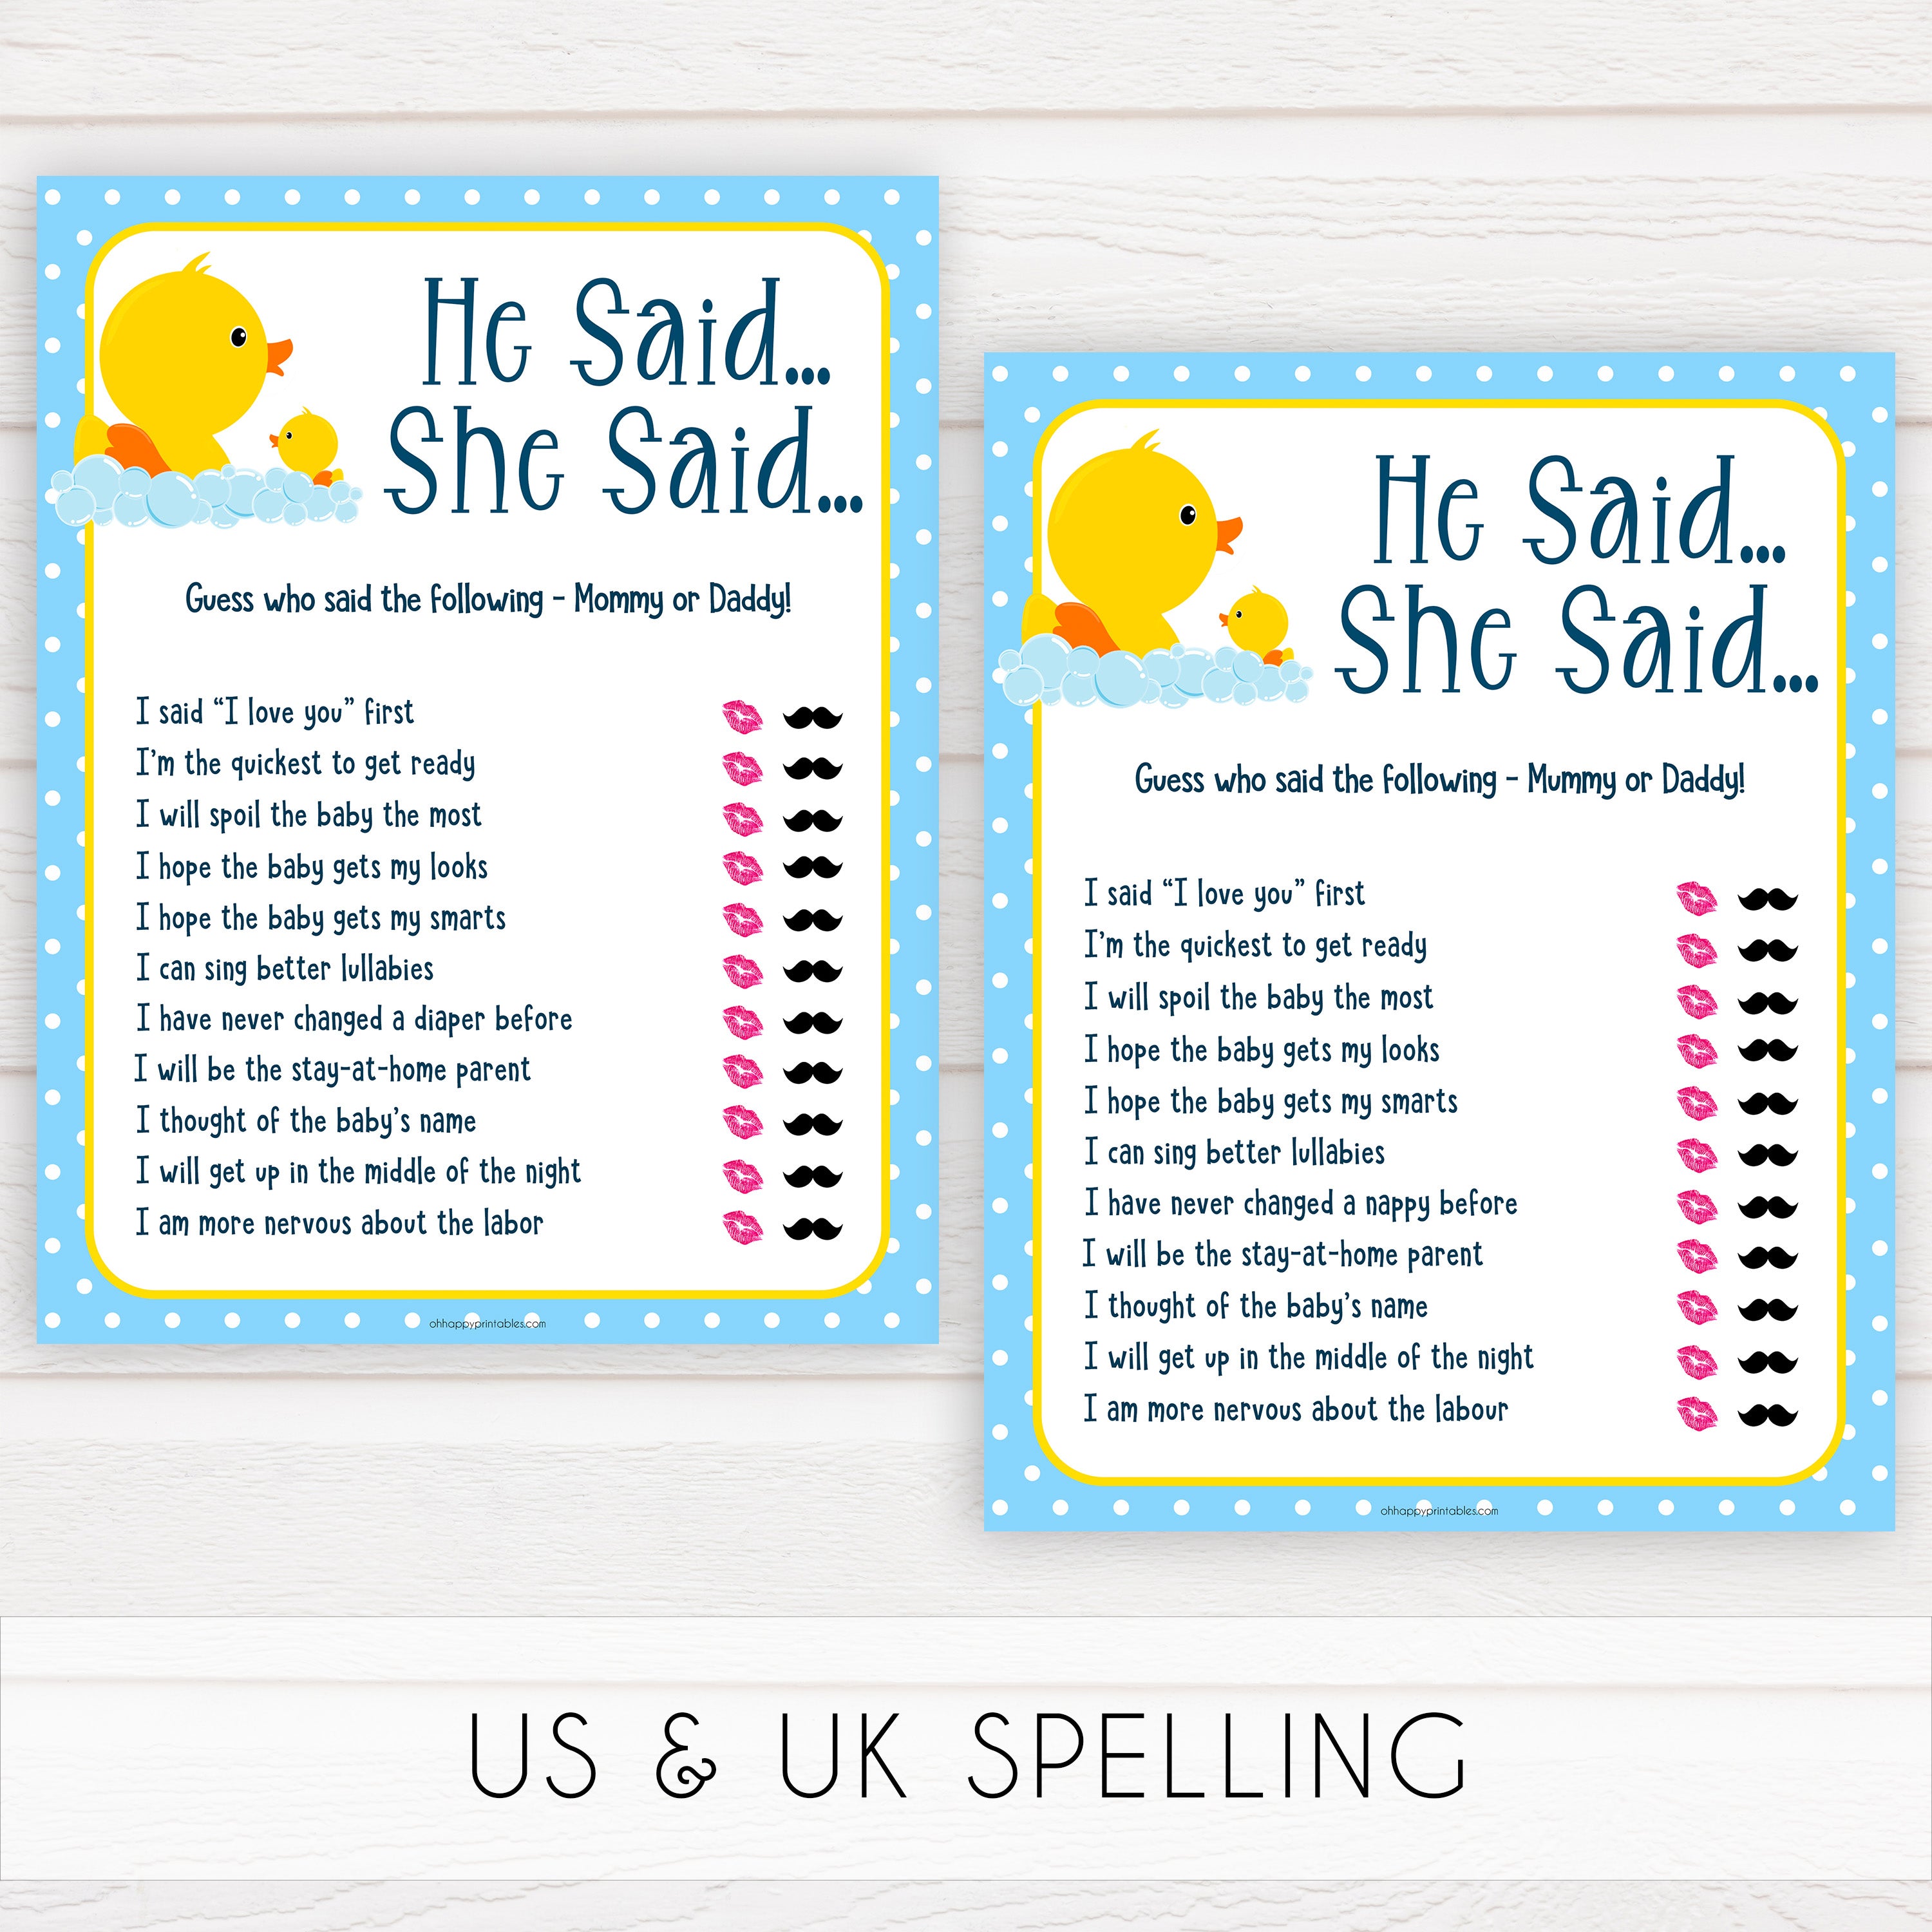 rubber ducky baby games, he said she said baby game, printable baby games, baby shower games, rubber ducky baby theme, fun baby games, popular baby games